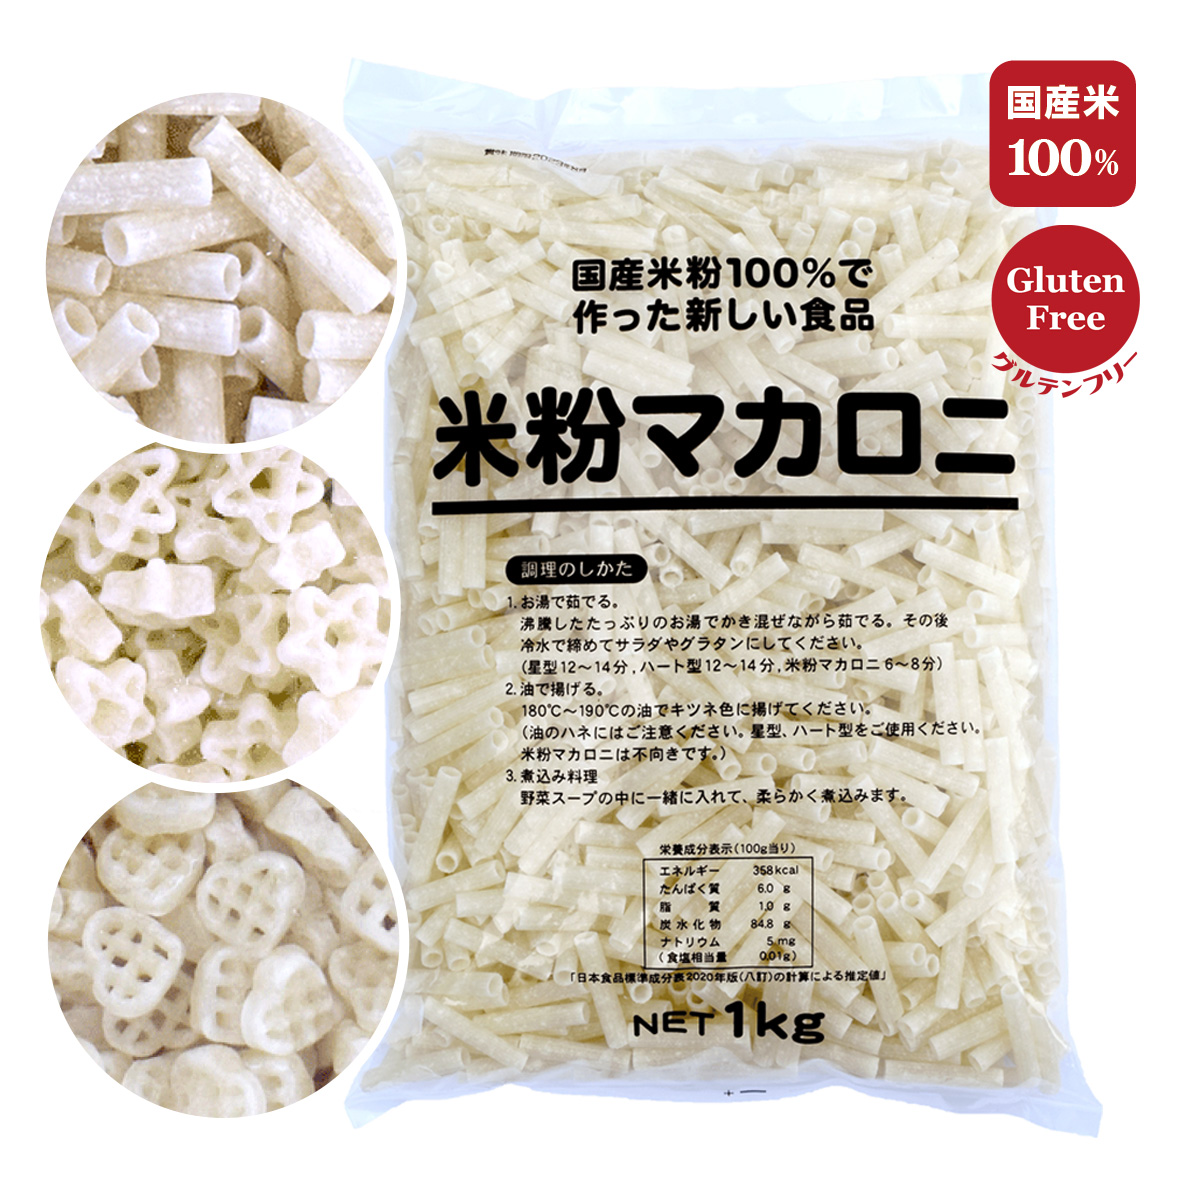  rice flour ma Caro ni1kg business use is possible to choose 3 kind rice flour pasta gru ton free ma Caro ni rice pasta rice flour noodle salad gratin soup school . meal child care . kindergarten 